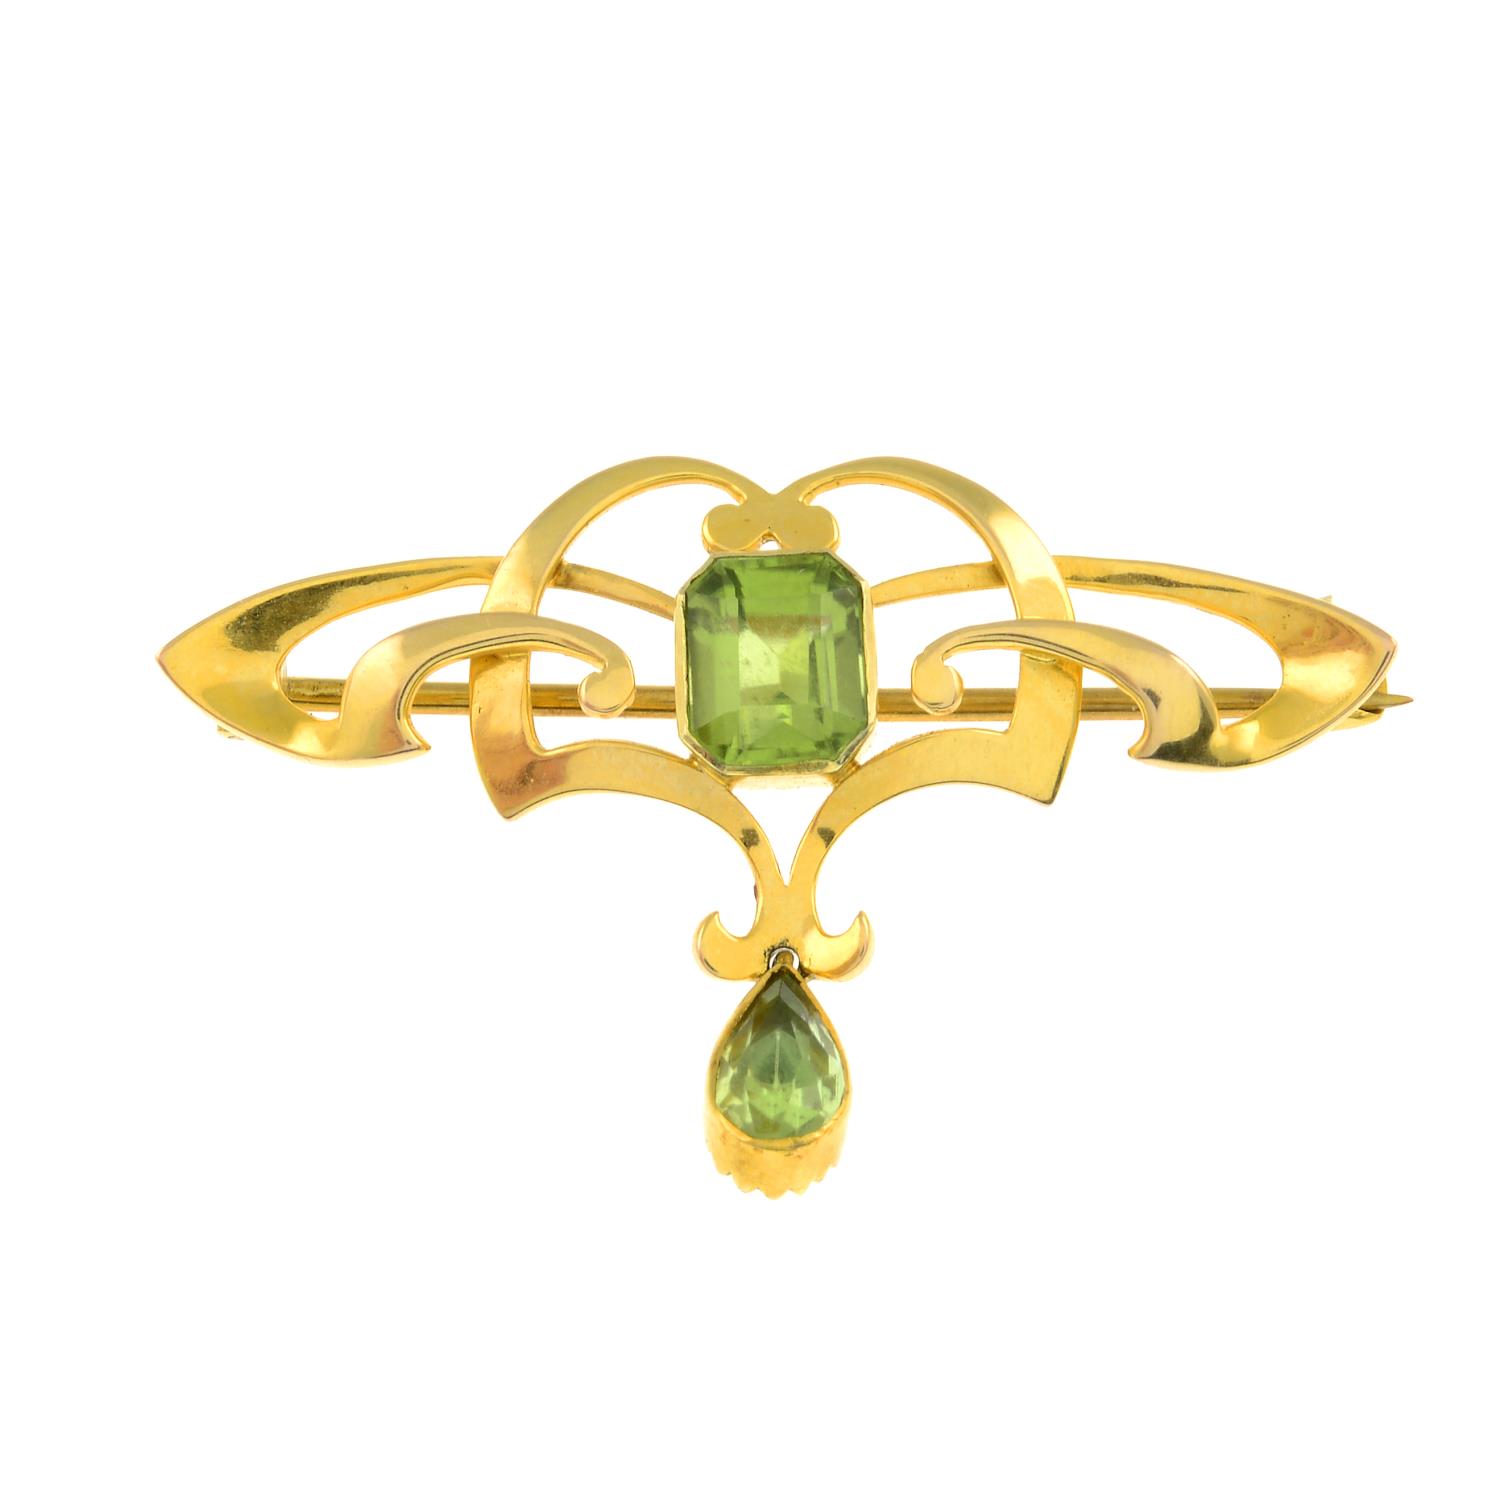 An early 20th century 15ct gold peridot brooch.Stamped 15CT.